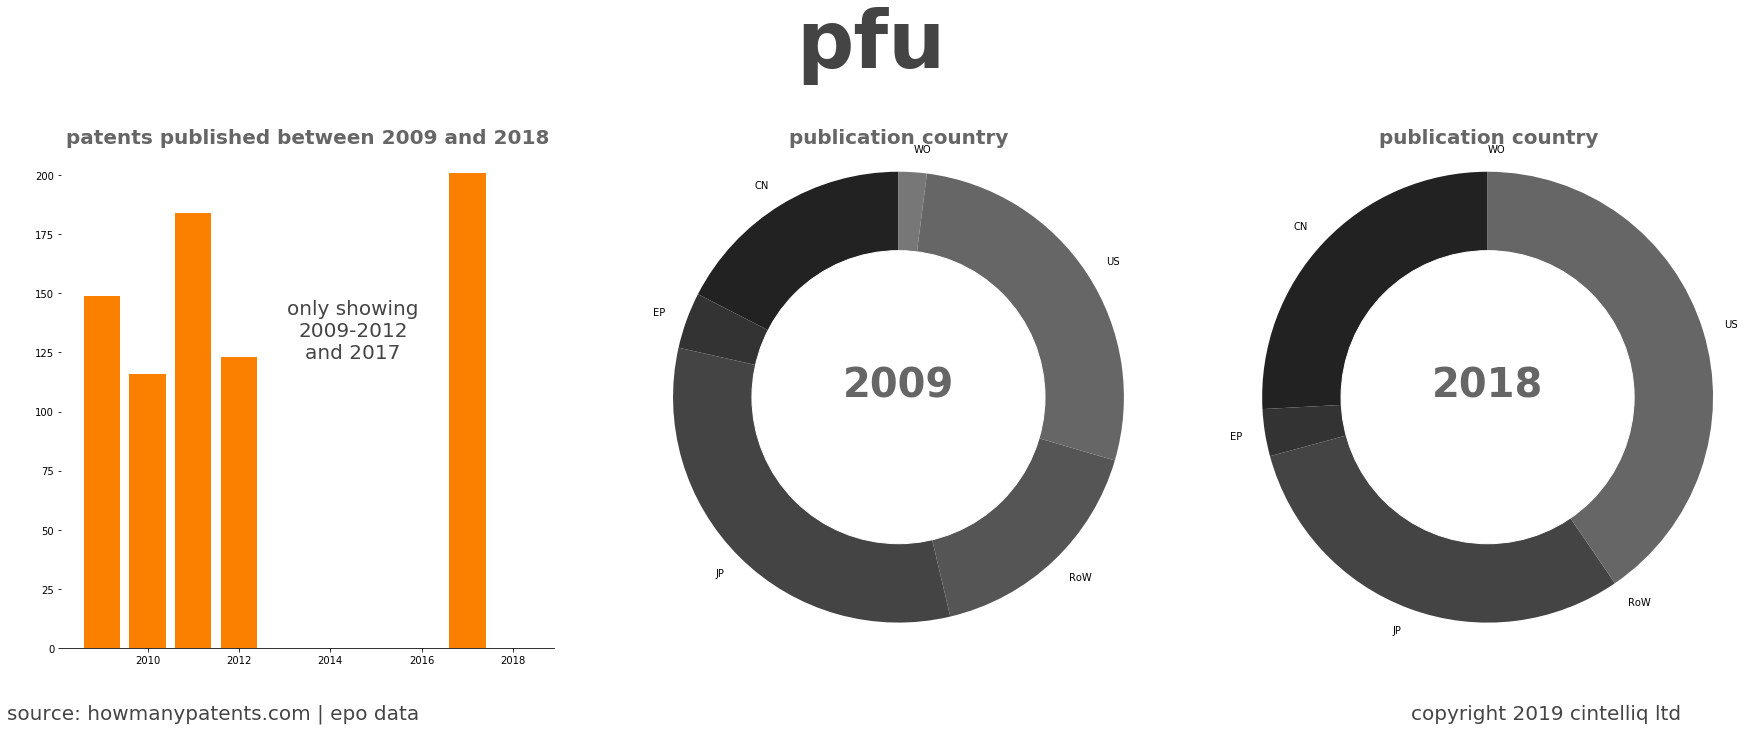 summary of patents for Pfu